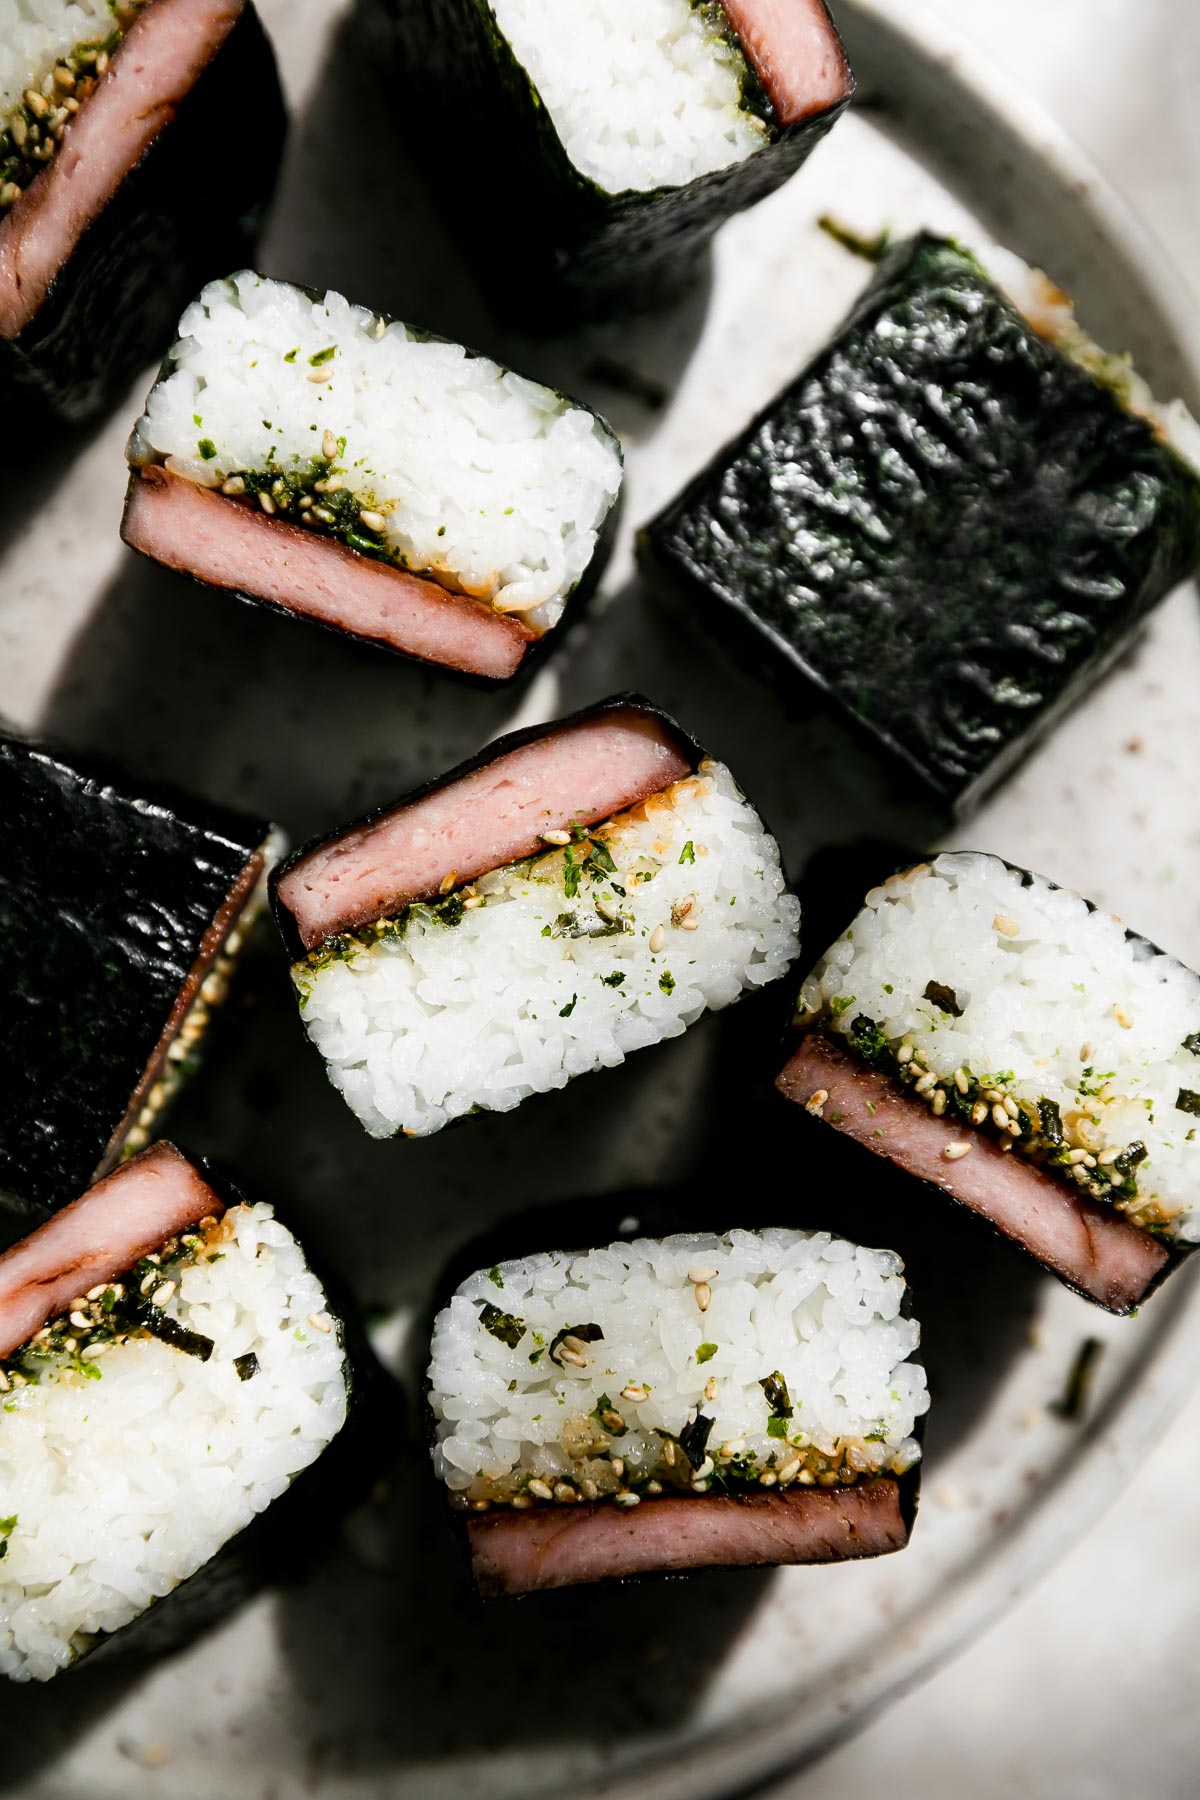 Nine finished spam musubi sit atop a gray speckled ceramic plate atop a creamy white textured surface.